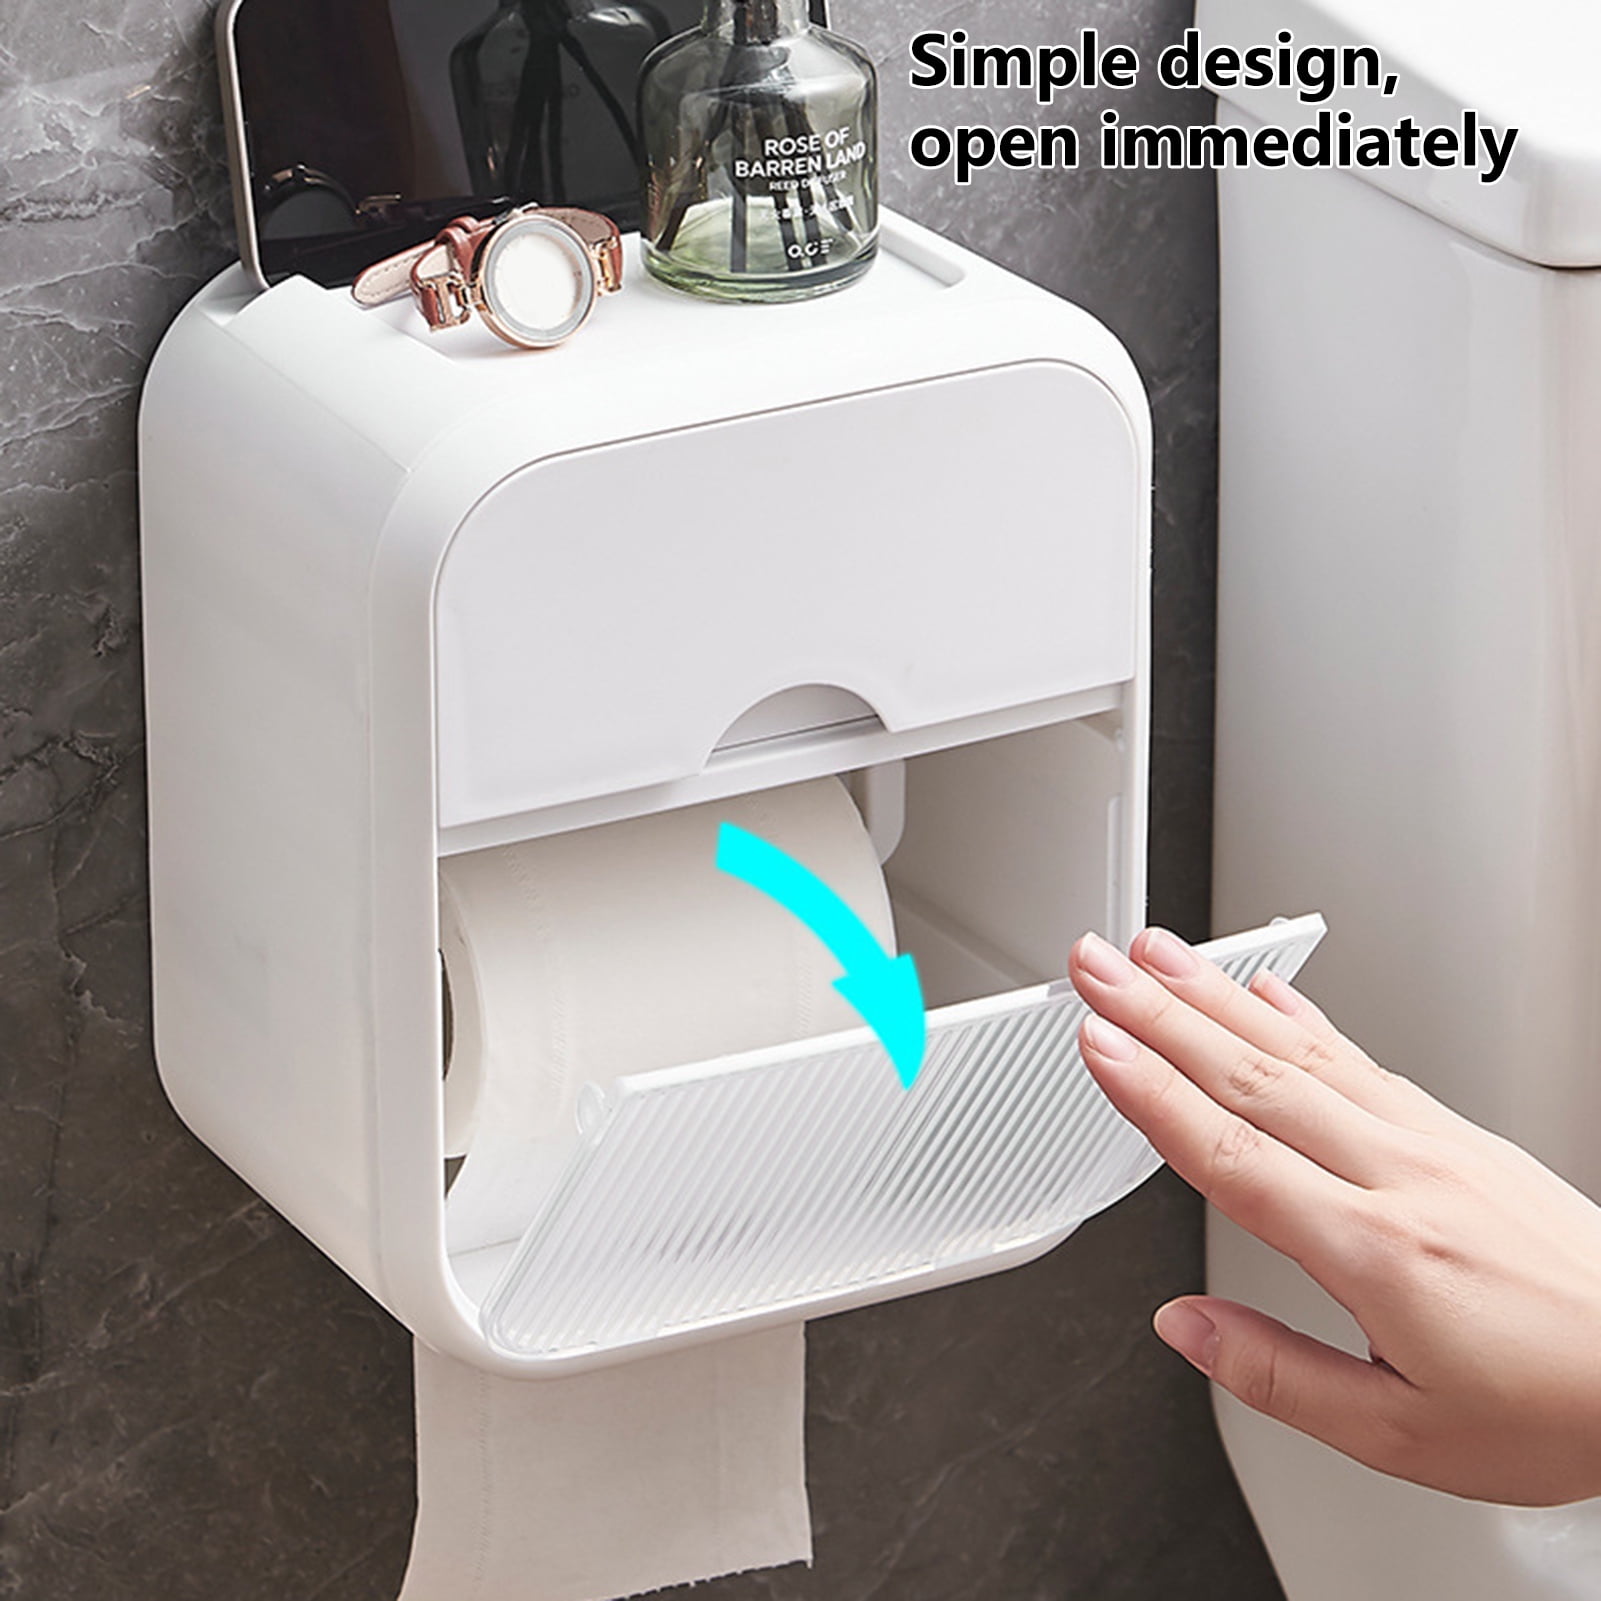 Yunx Toilet Paper Holder Wall-Mounted Punch Free Space-Saving Hidden Drawer Great Weight Bearing Home Toilet Paper Dispenser Tissue Storage Box